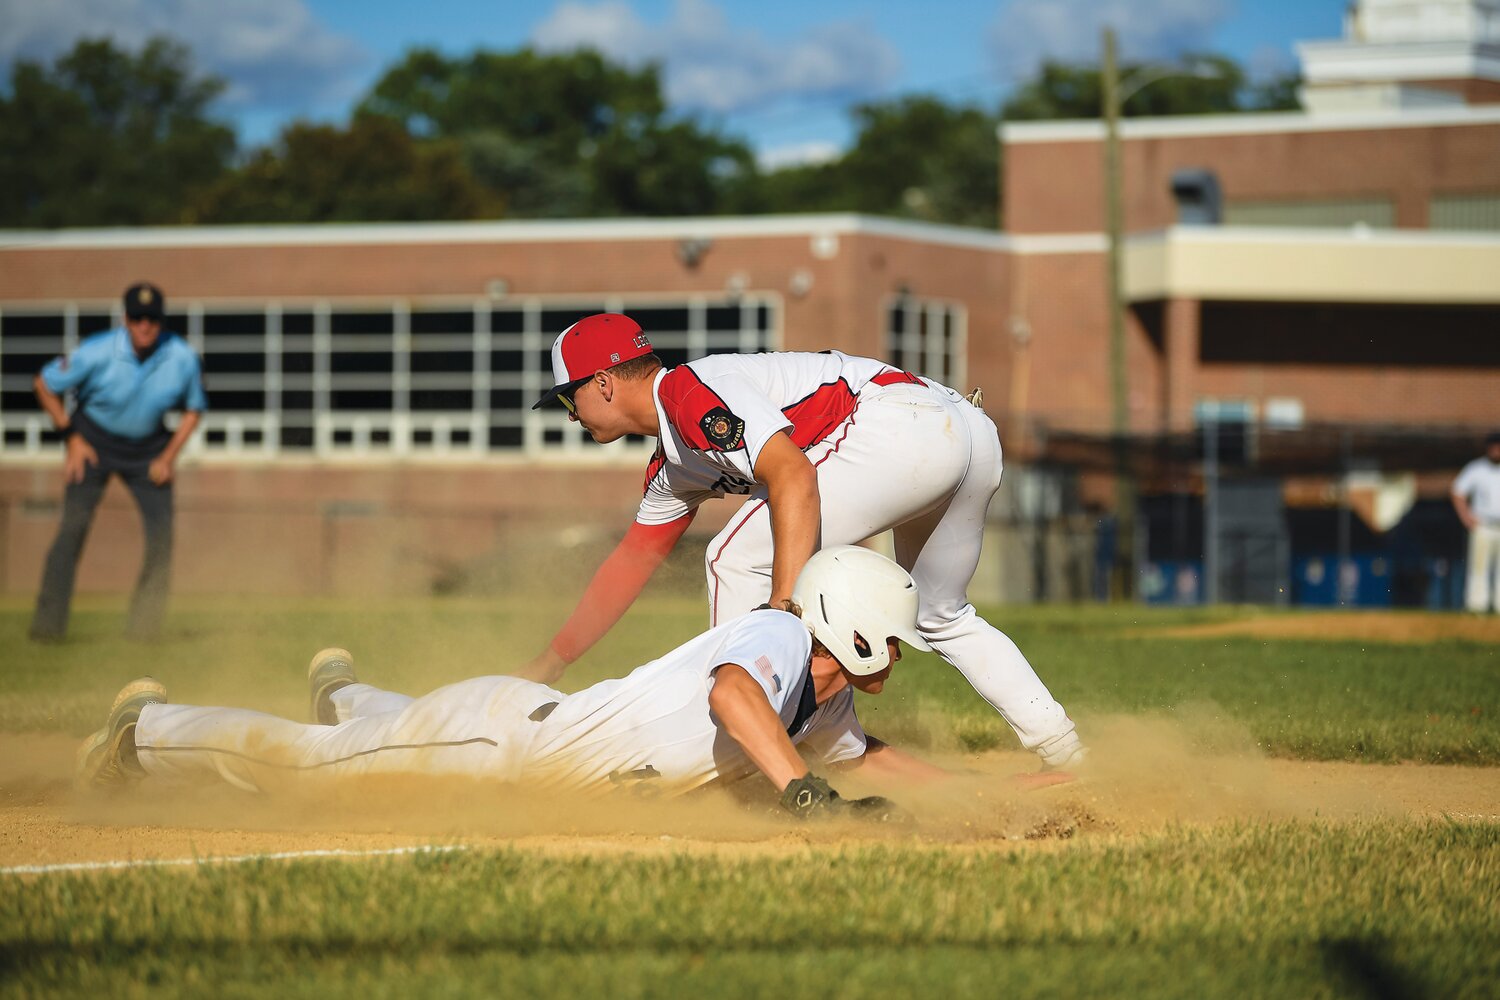 Doylestown's Ernie Sanchez slides into third base ahead of the throw to Souderton’s Joey Nase in the seven-run first inning.